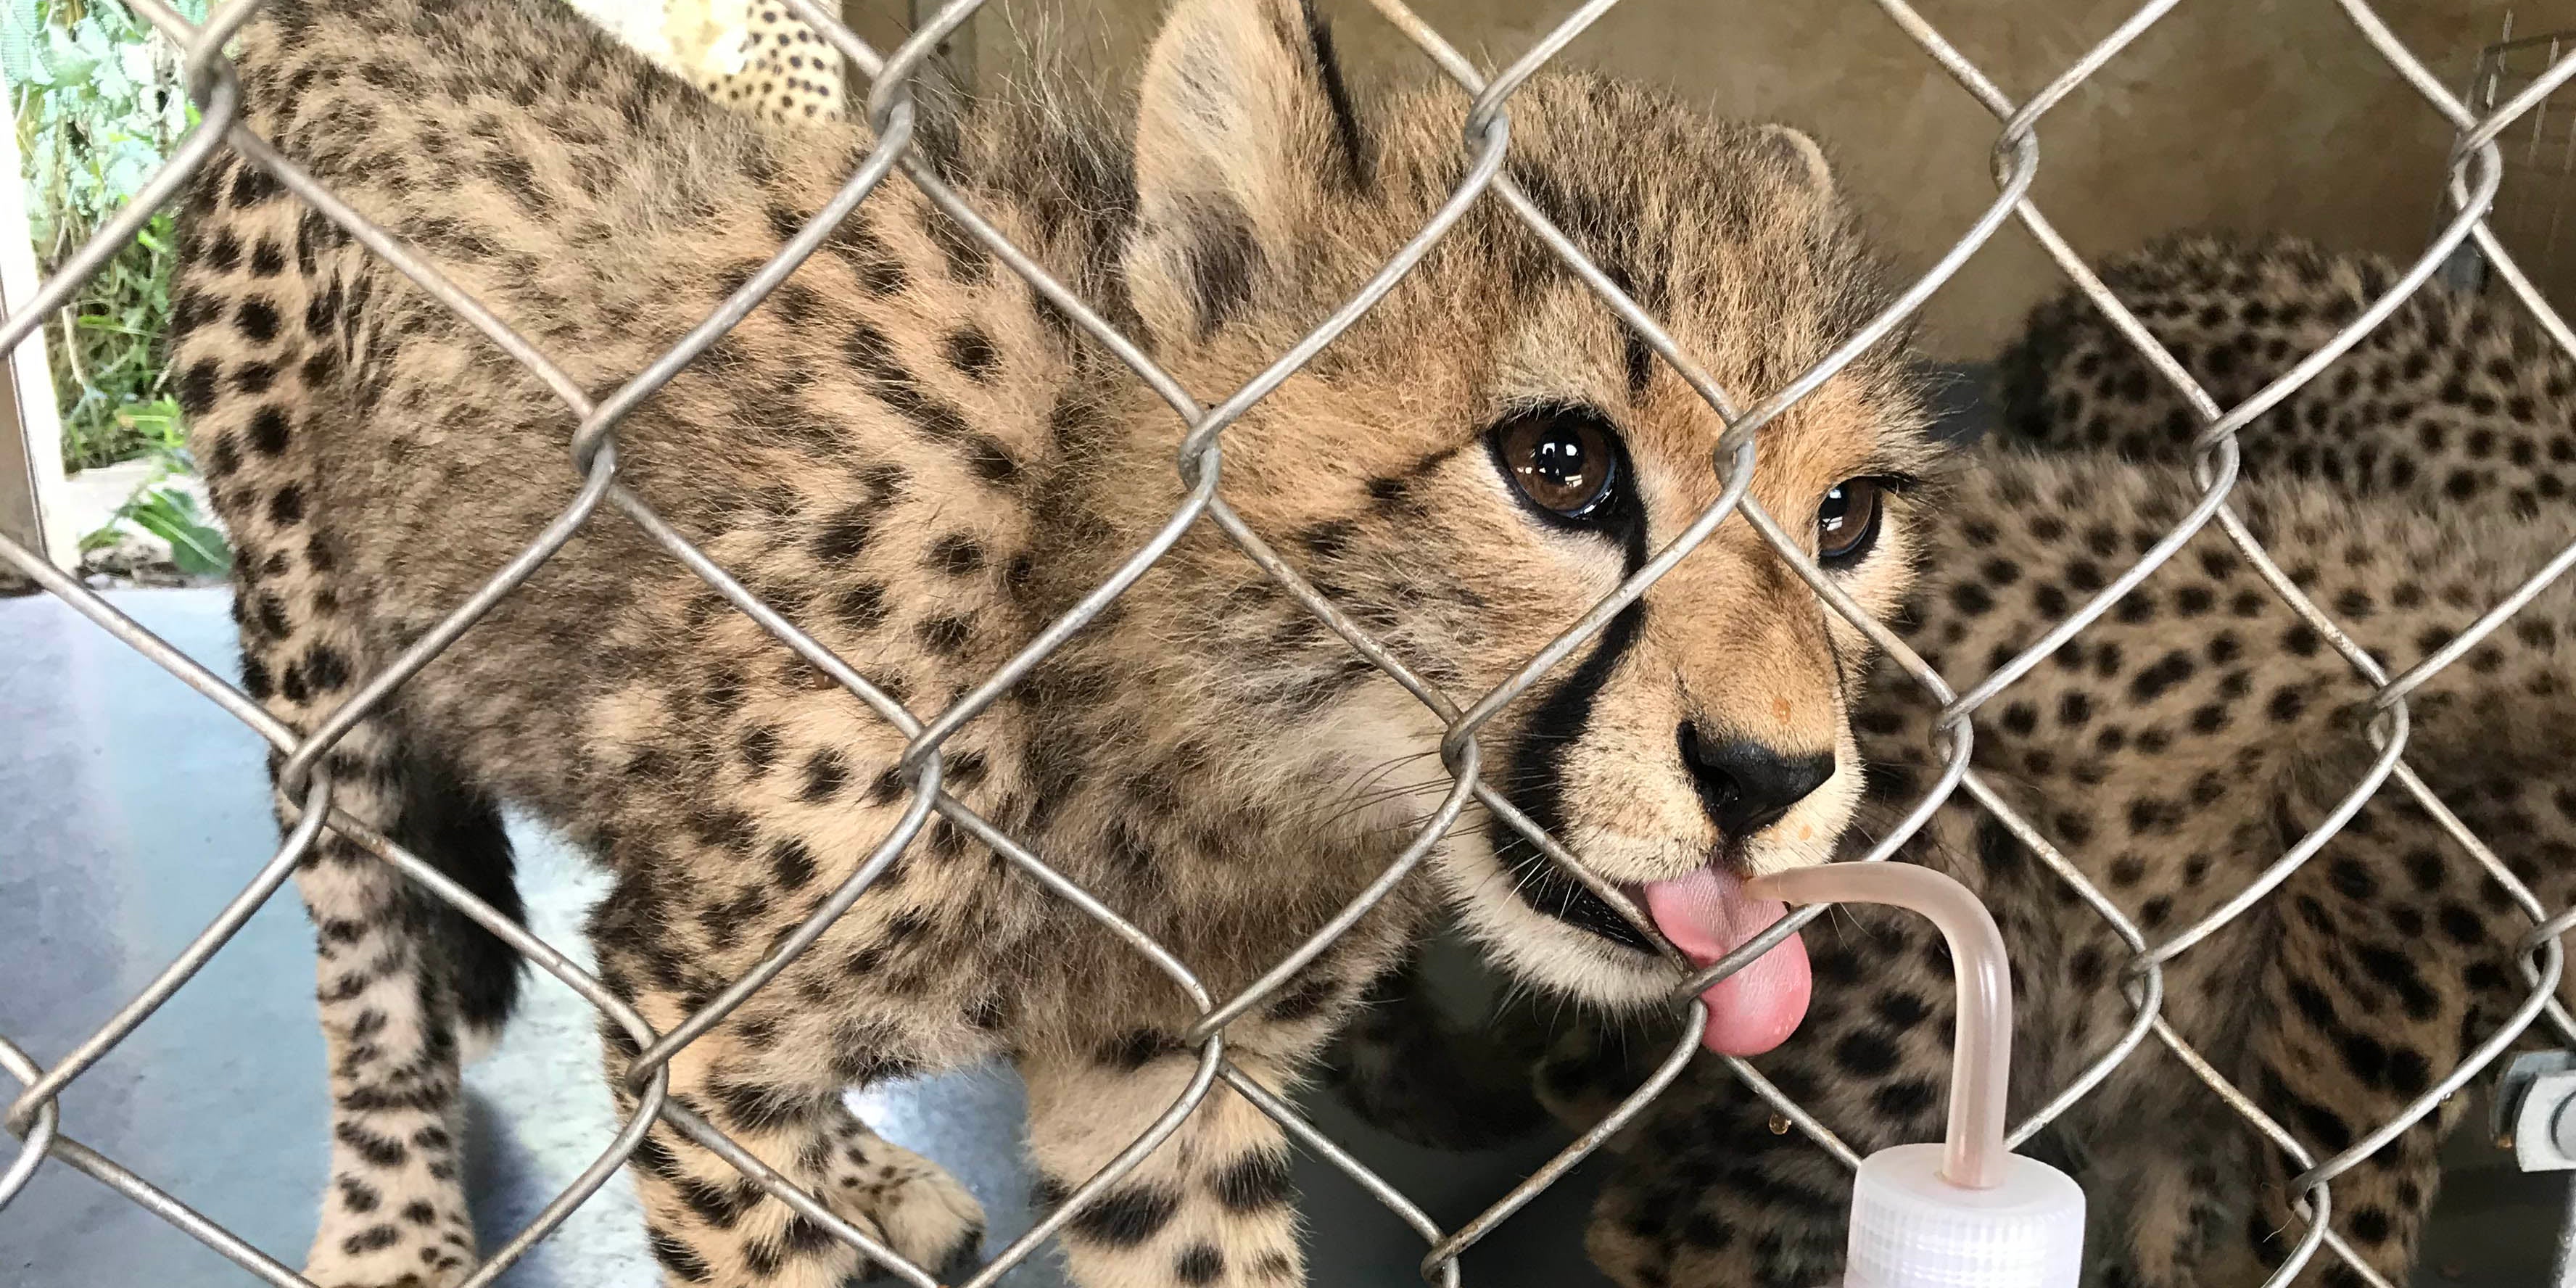 As a reward for standing still during their weigh-ins, the cheetah cubs receive beef blood from a squeeze bottle. 